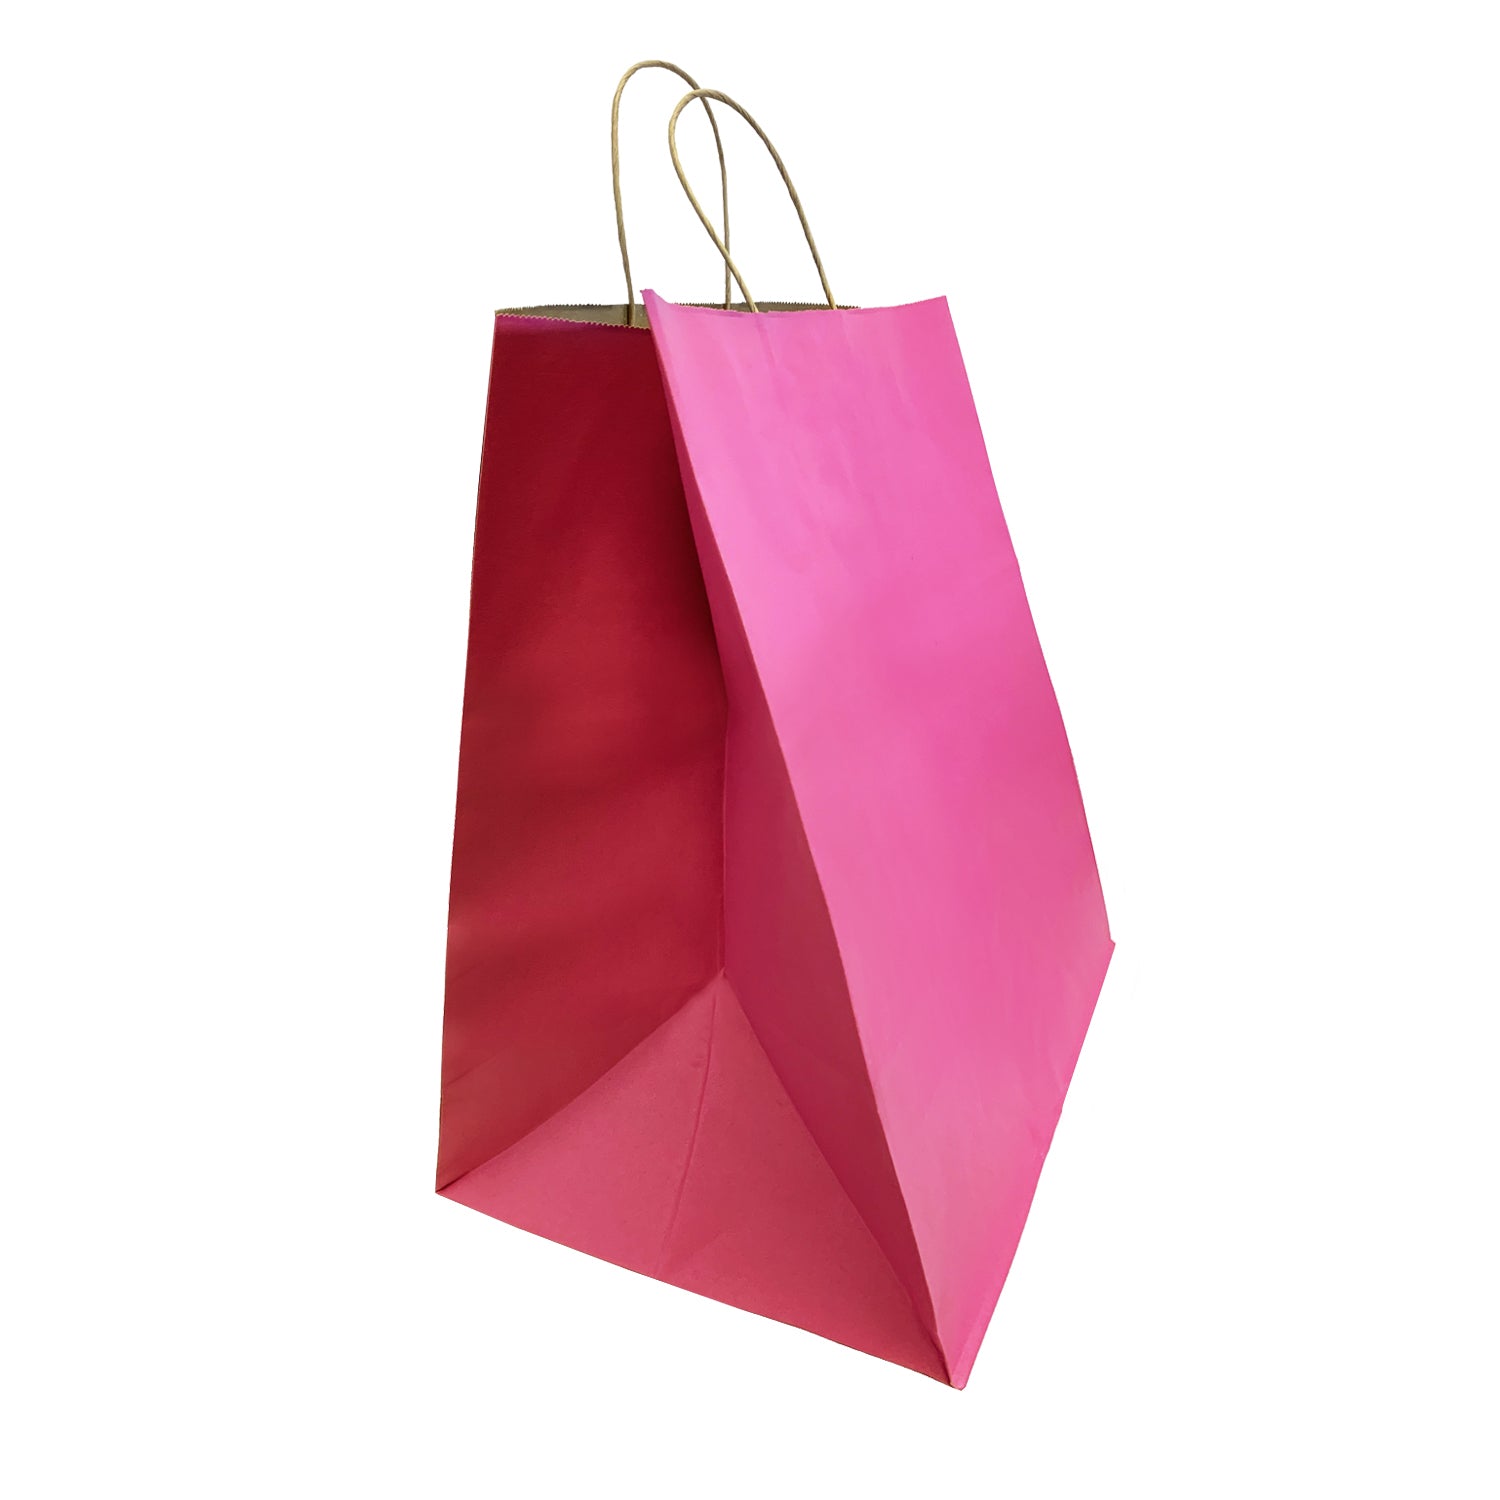 150 Pcs, Super Royal, 14x10x15.75 inches, Pink Kraft Paper Bags, with Twisted Handle